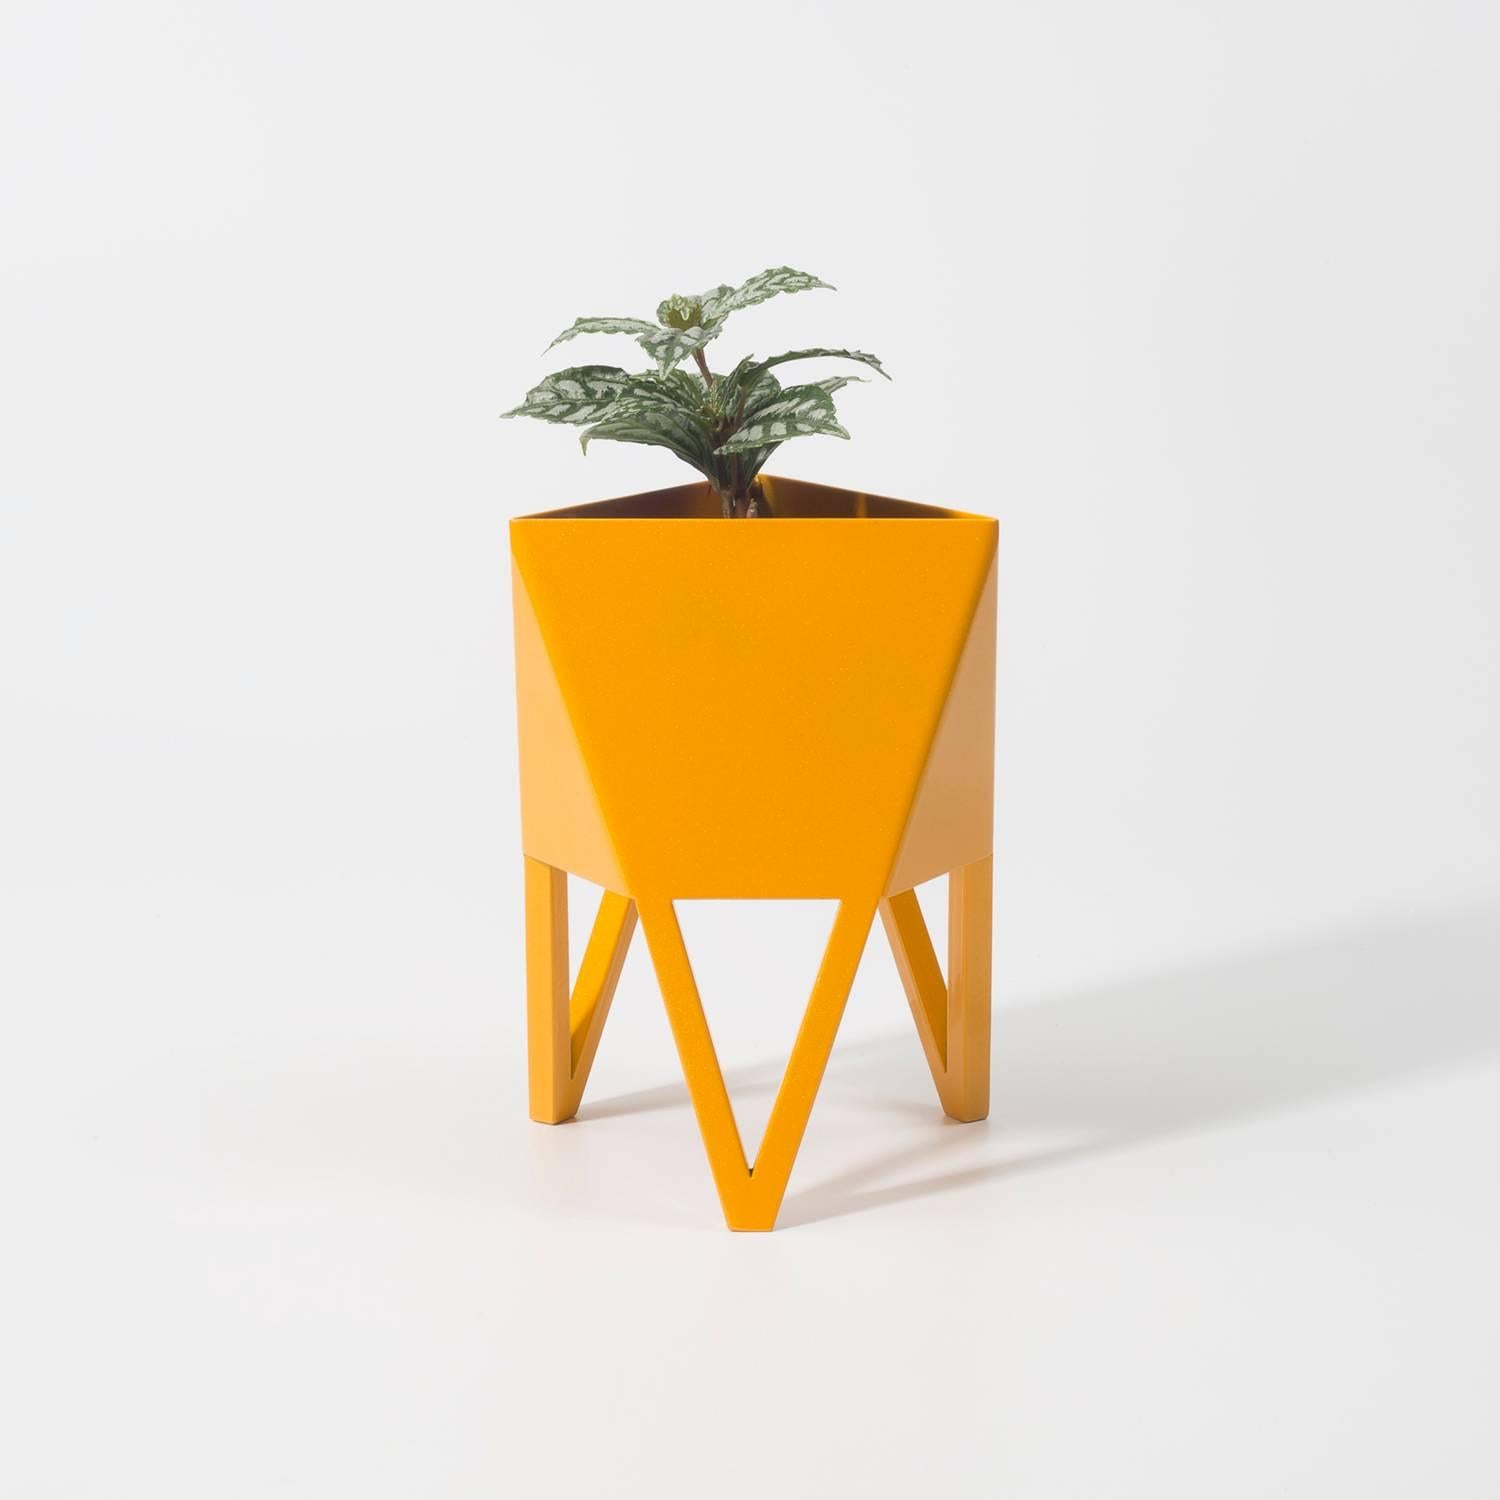 Introducing Force/Collide's signature planter in sunbeam daffodil yellow. Using a seamless brake-forming technique, one sheet of steel is wrapped into a unique geometric pattern that's triangular at the top and hexagonal at the base. Three V-shaped